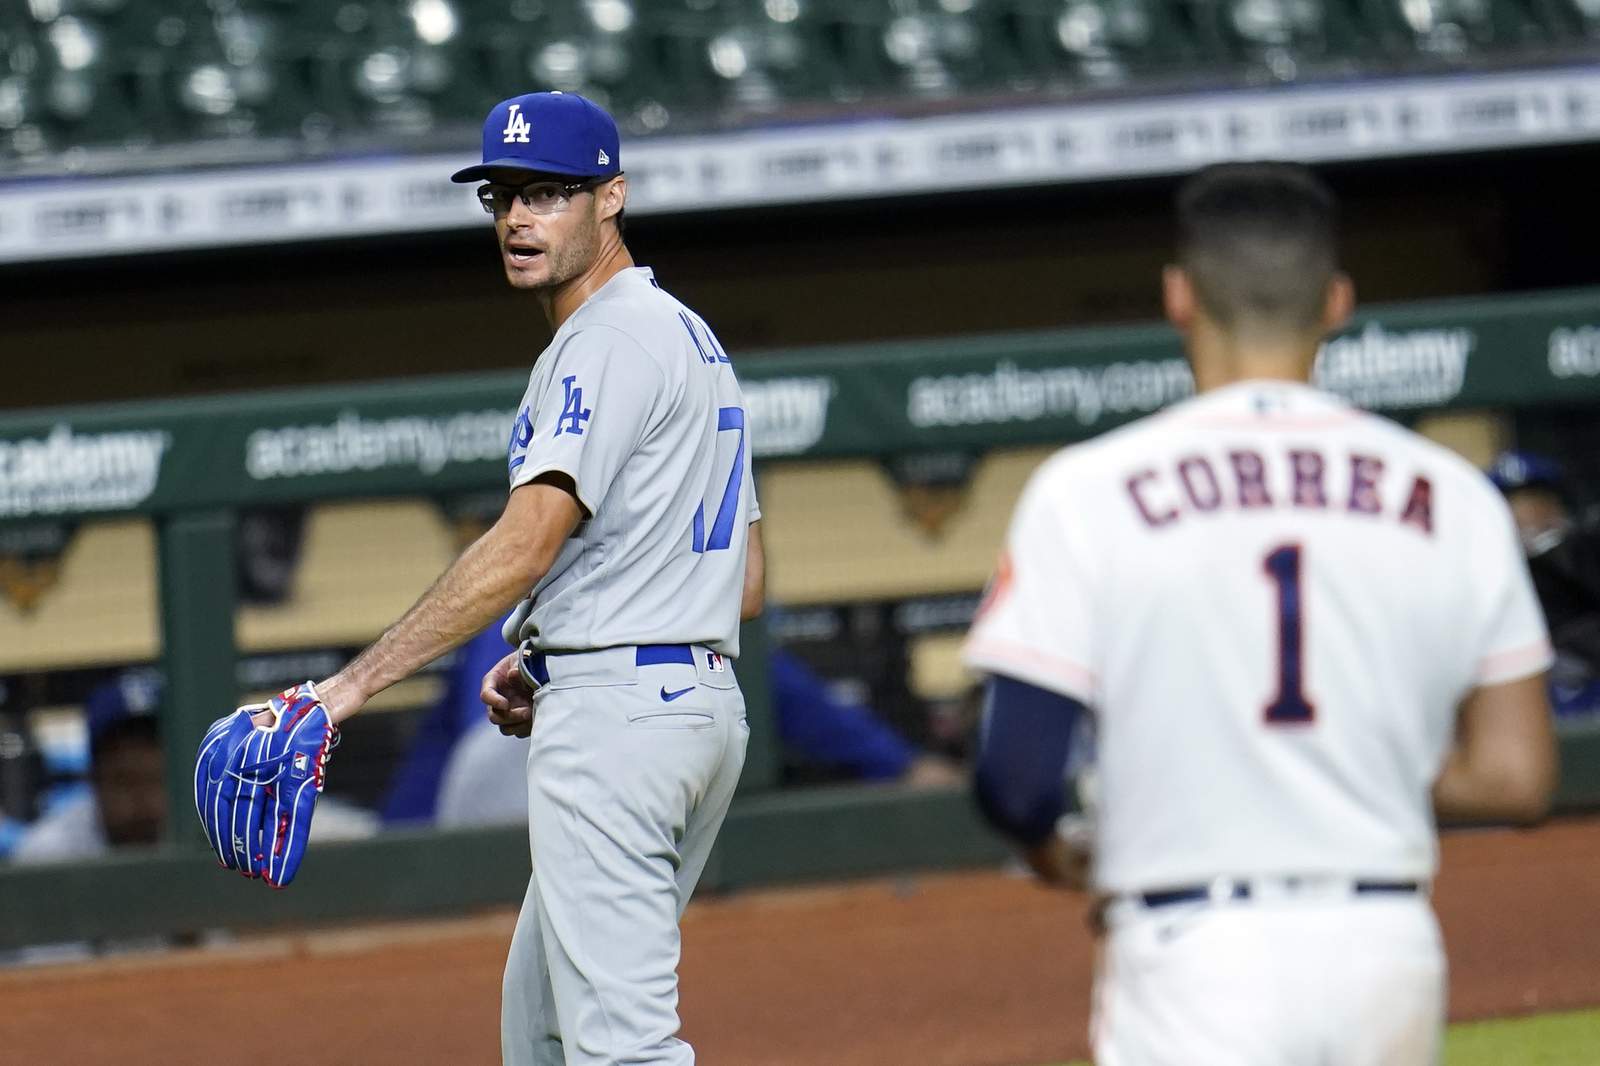 WATCH: Benches clear as Dodgers beat Astros 5-2